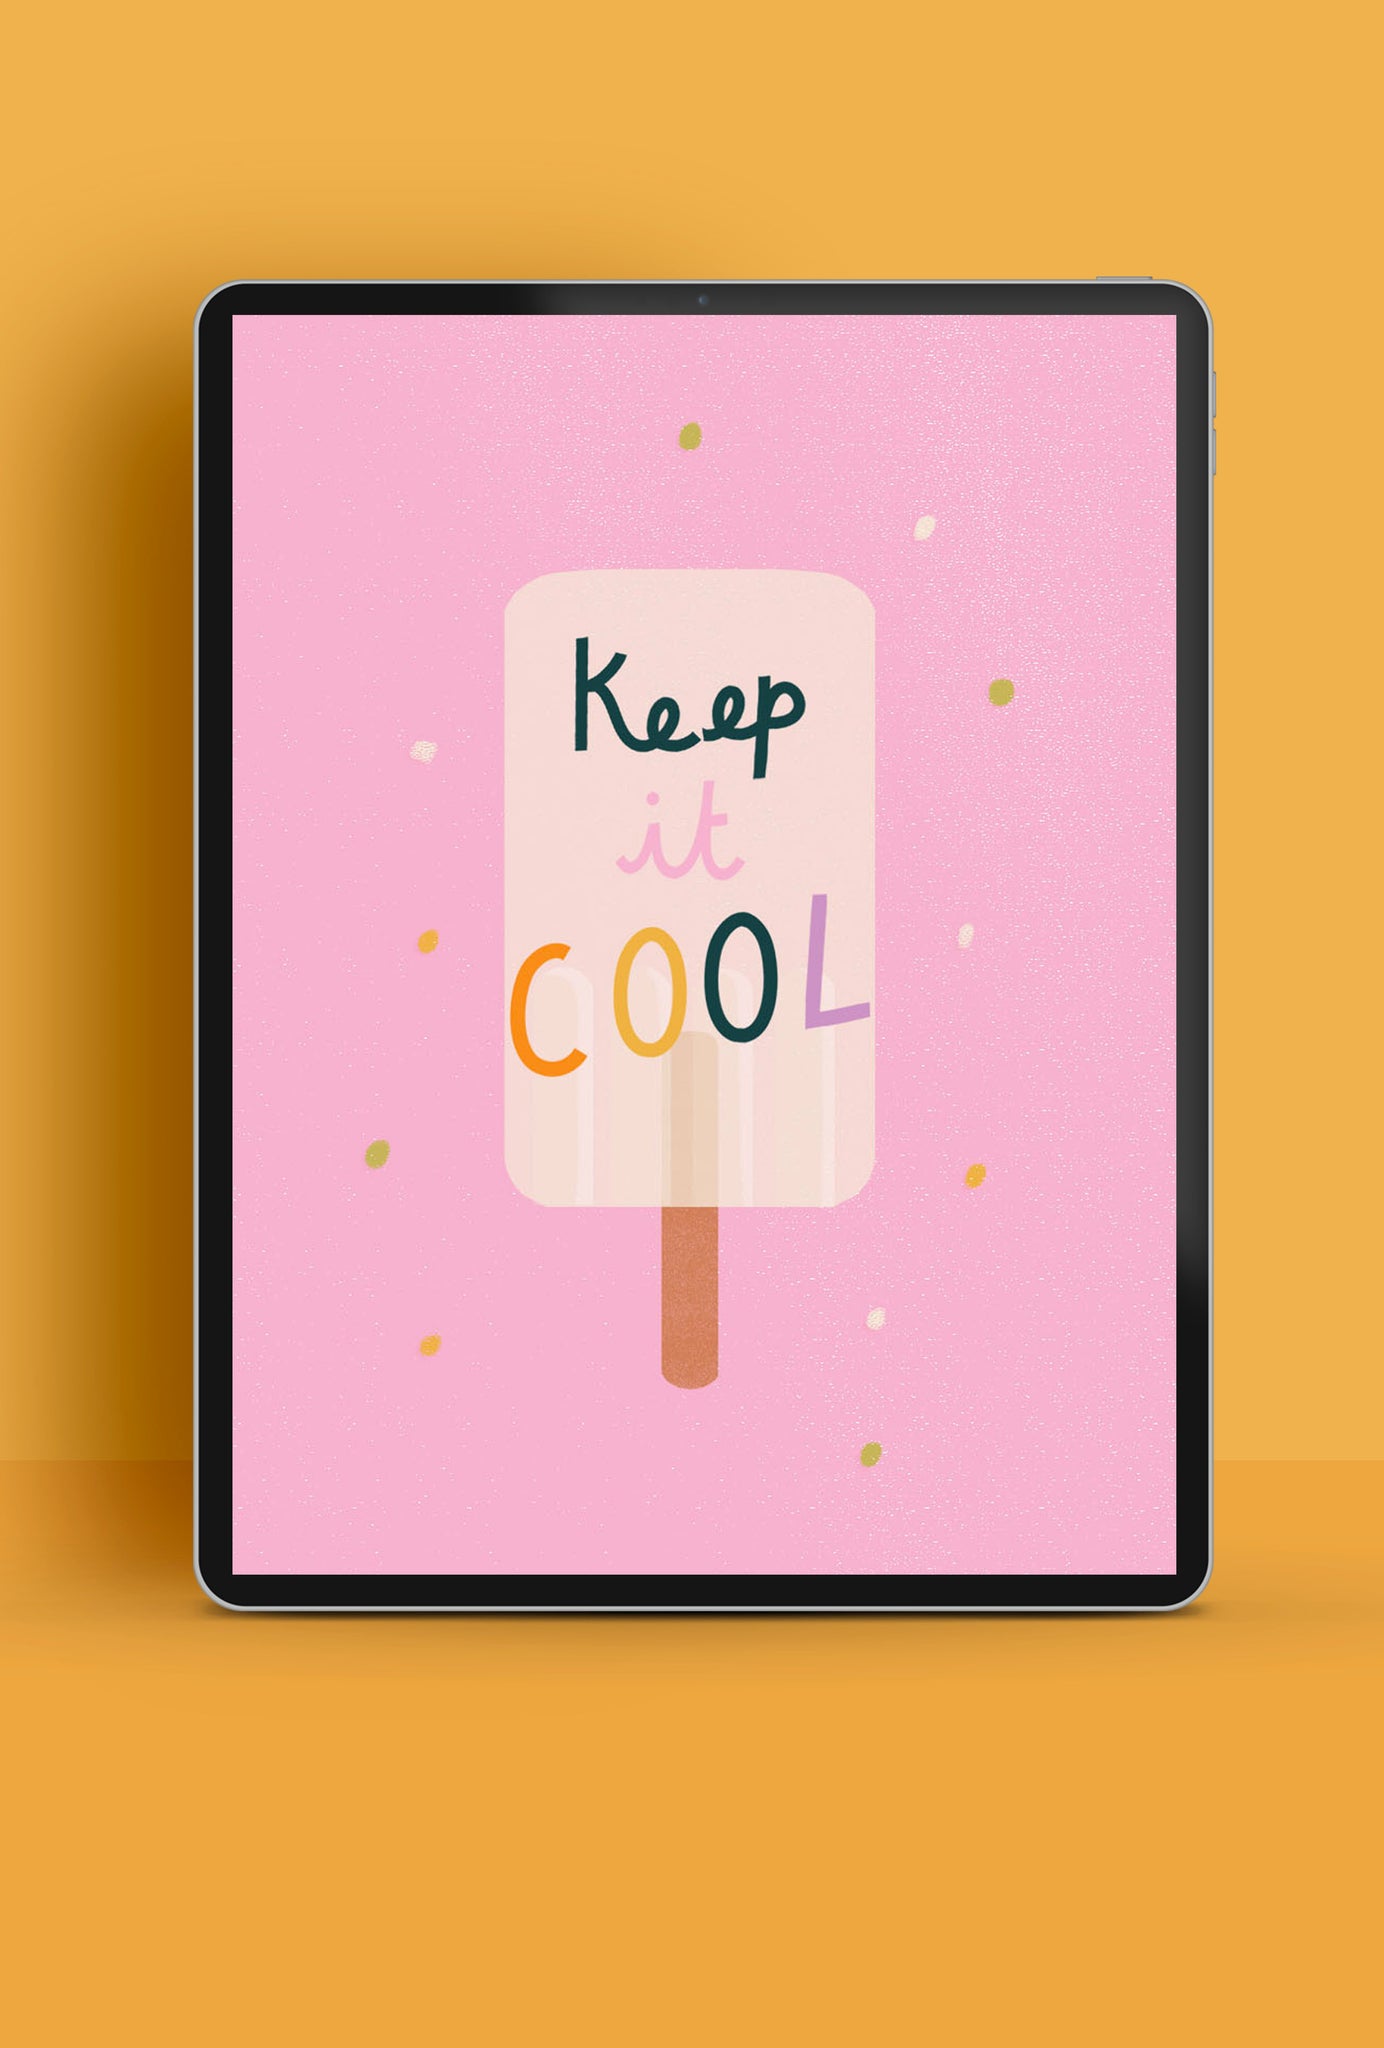 'Keep it cool' fun ice lolly tablet wallpaper | Raspberry Blossom